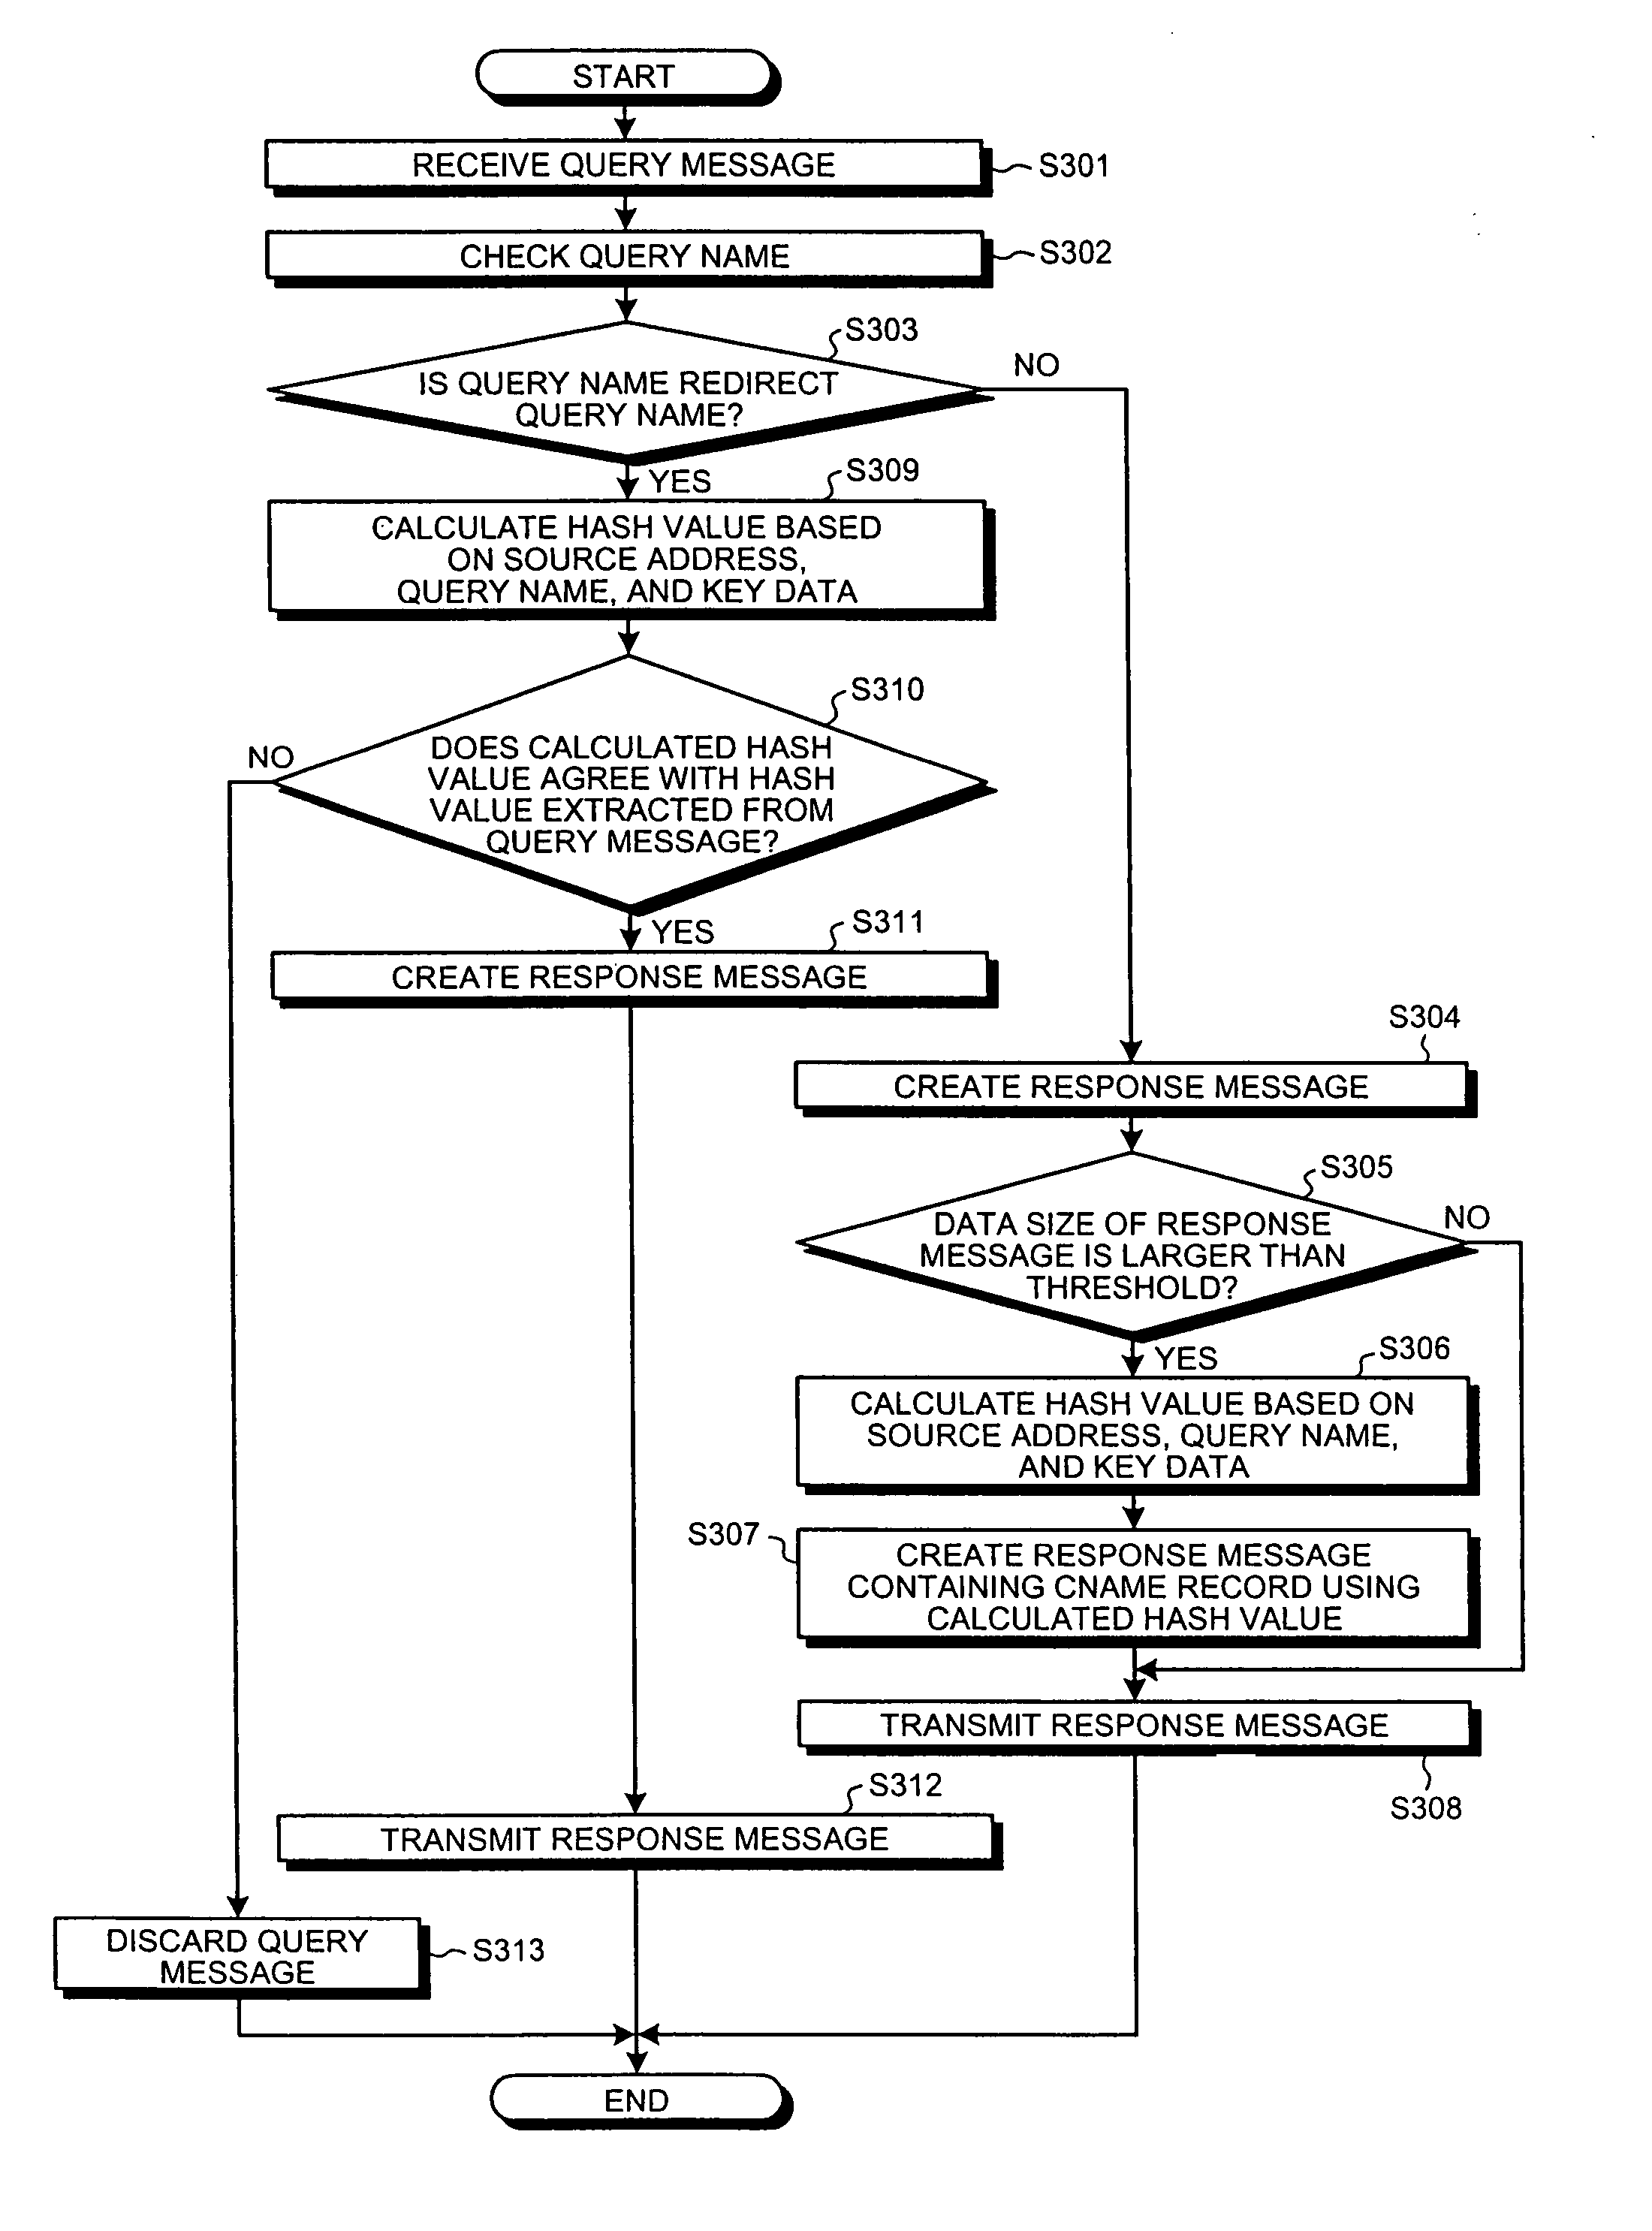 Server apparatus and method of preventing denial of service attacks, and computer program product